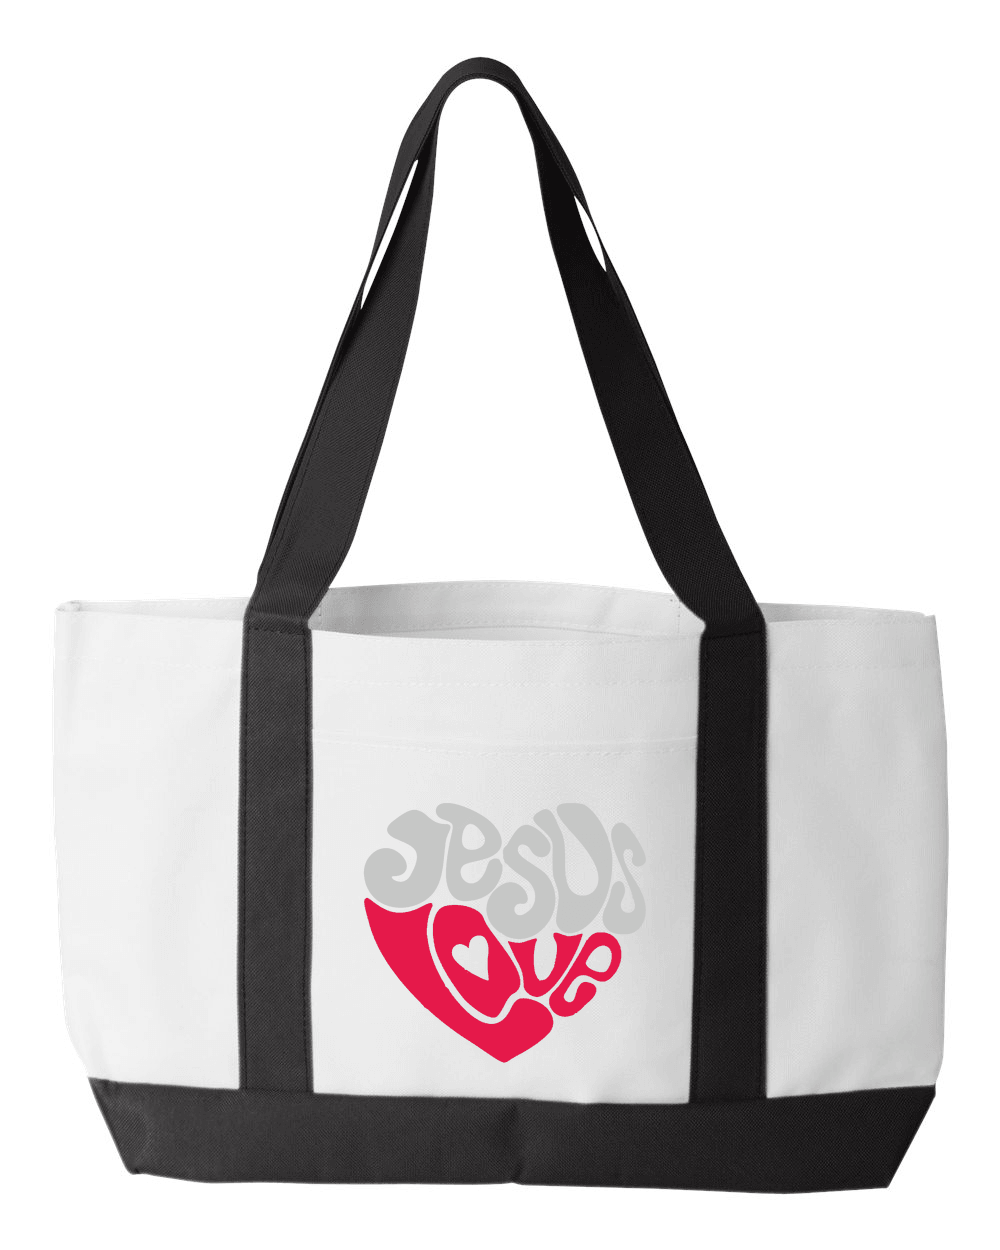 Designs by MyUtopia Shout Out:Jesus Love Heart Tote Bag Canvas Totebag Gym / Beach / Pool Gear Bag